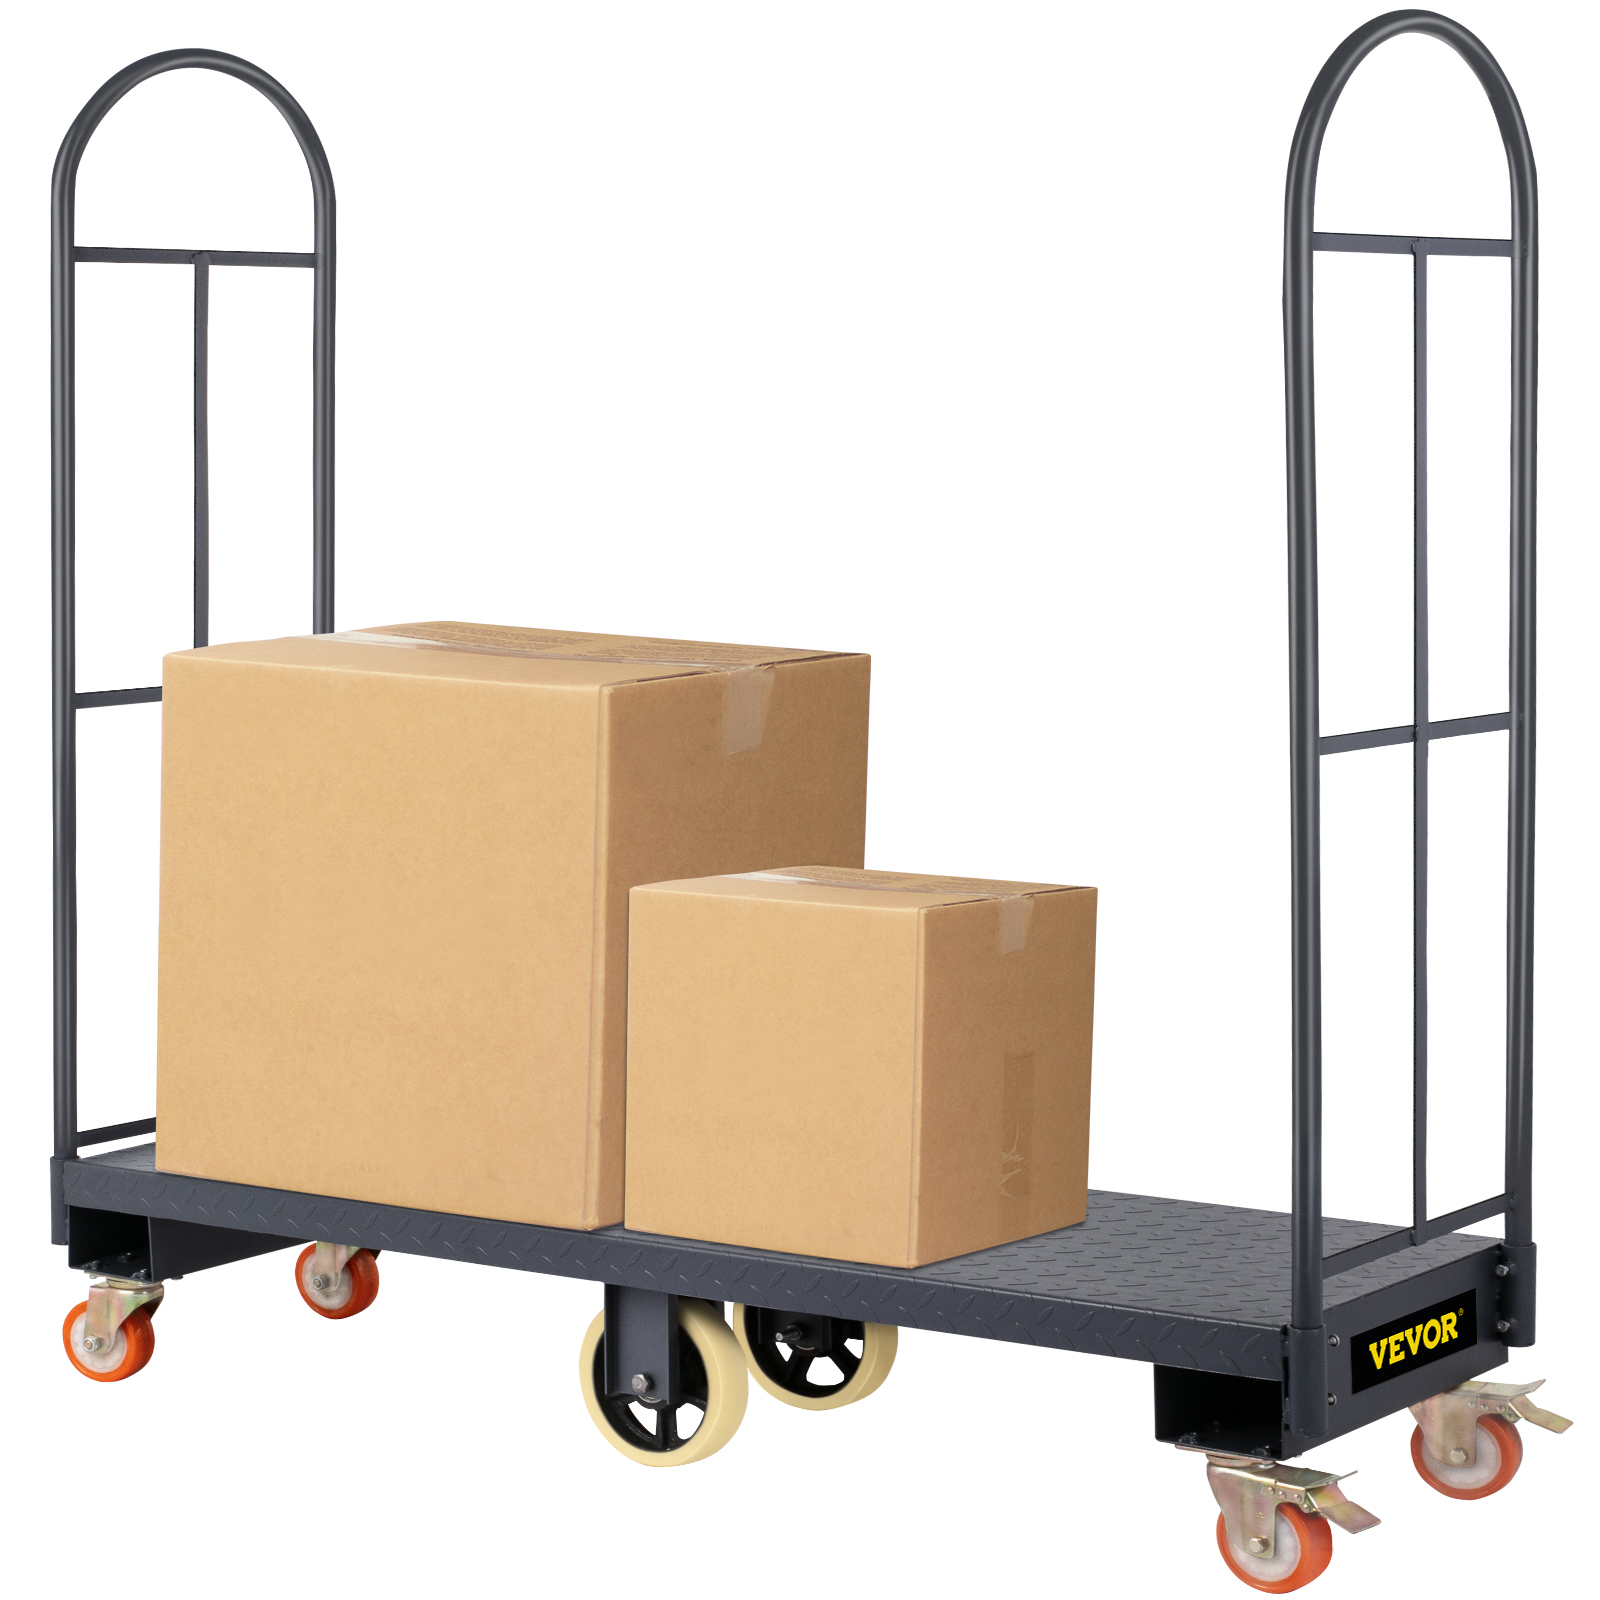 U-boat Utility Cart 63l*61h 2000lbs Capacity With Removable Handles Steel от Vevor Many GEOs